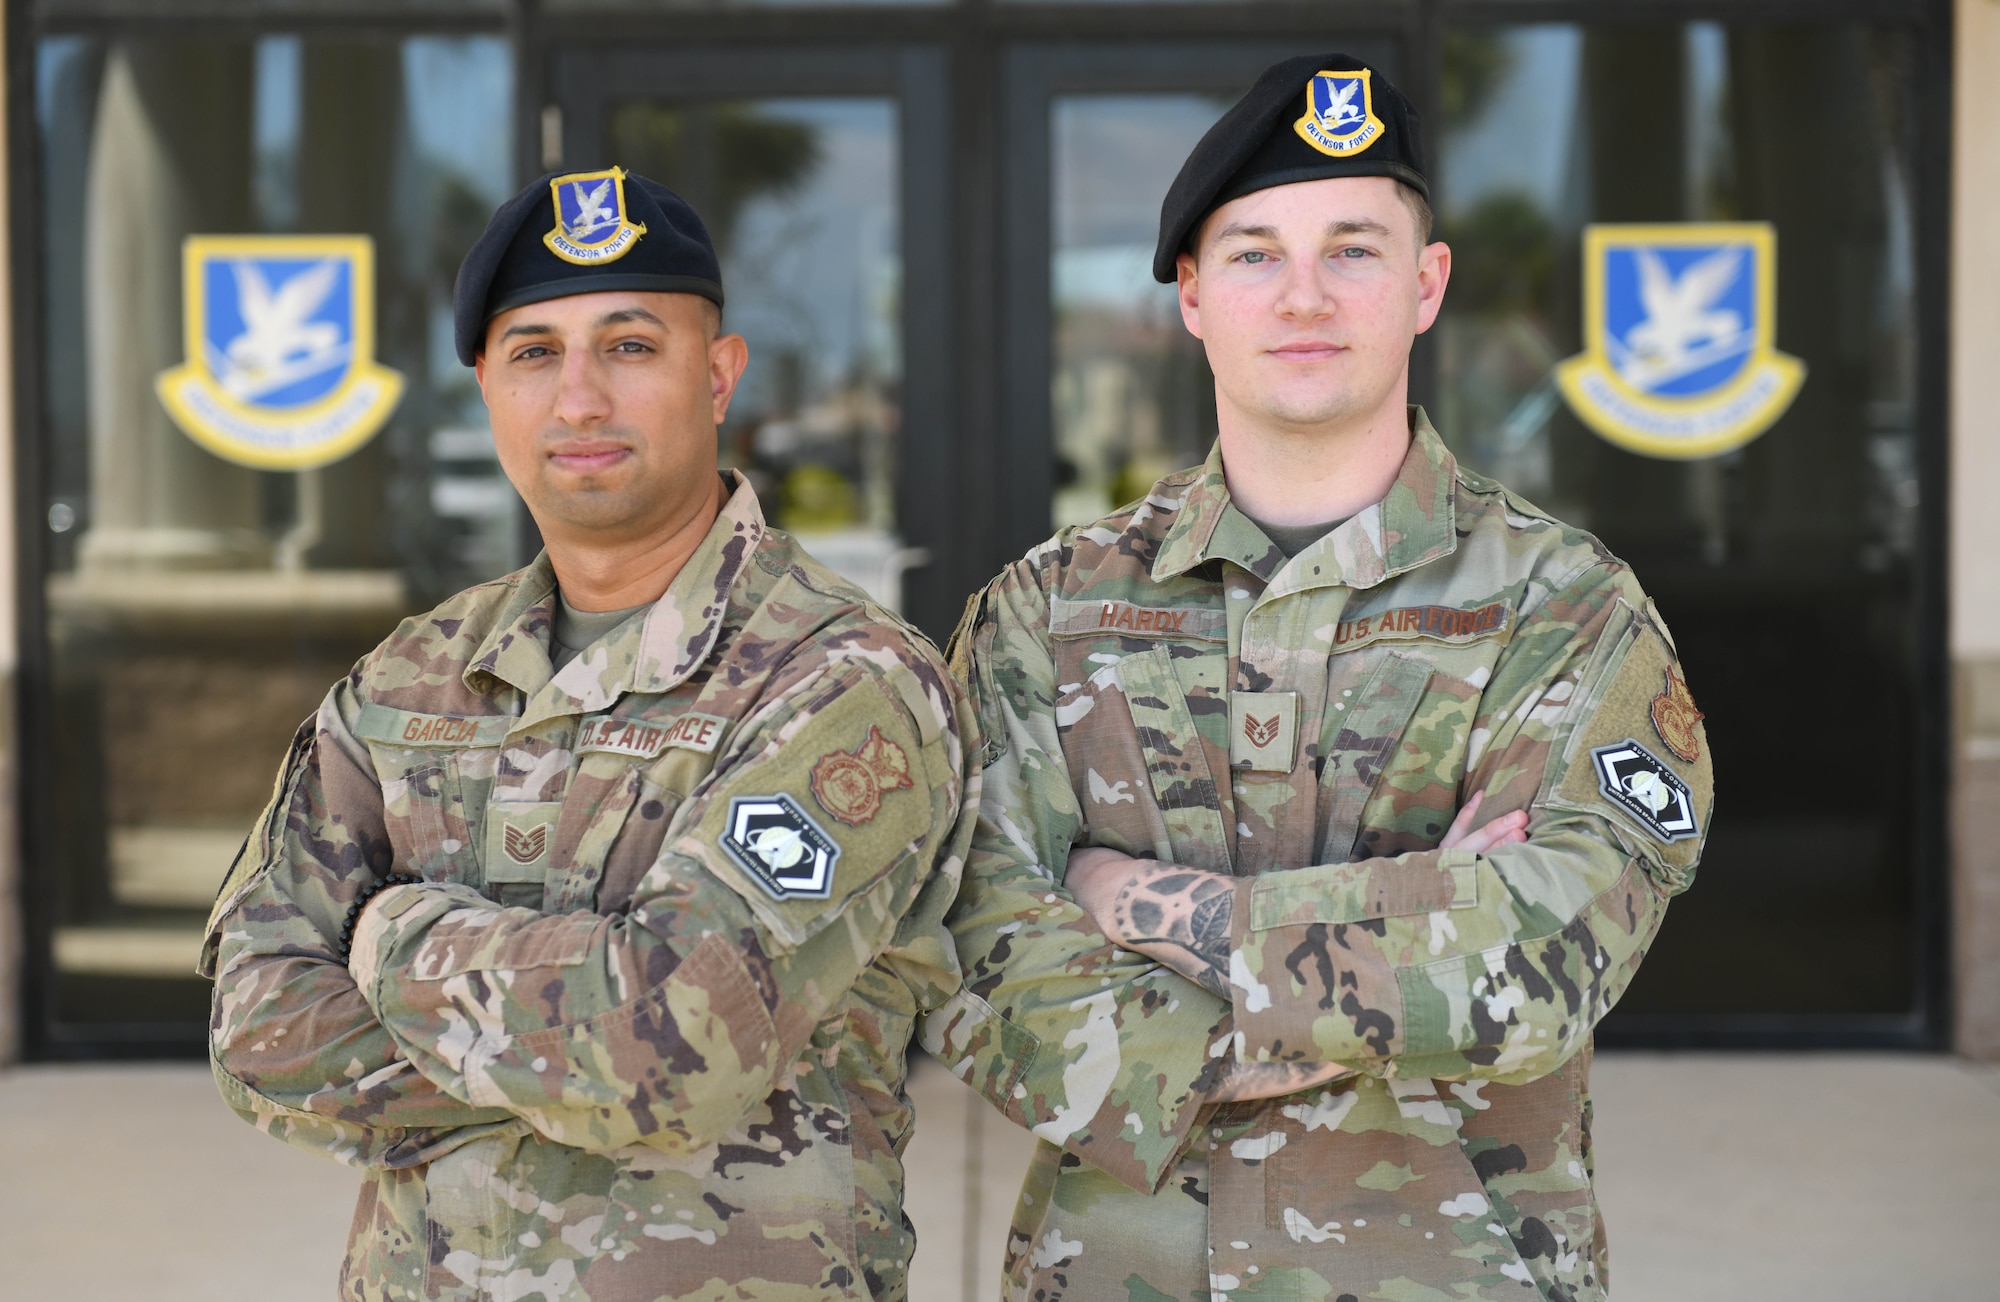 U.S. Air Force Tech. Sgt. Urich Garcia and U.S. Air Force Staff Sgt. Brian Hardy, 45th Security Forces Squadron supra coders, stand outside the 45th SFS building at Patrick Space Force Base, Fla., April 25, 2022. Supra coders have to complete a software development bootcamp that teaches full-stack javascript development and application deployment before receiving the title of supra coder.